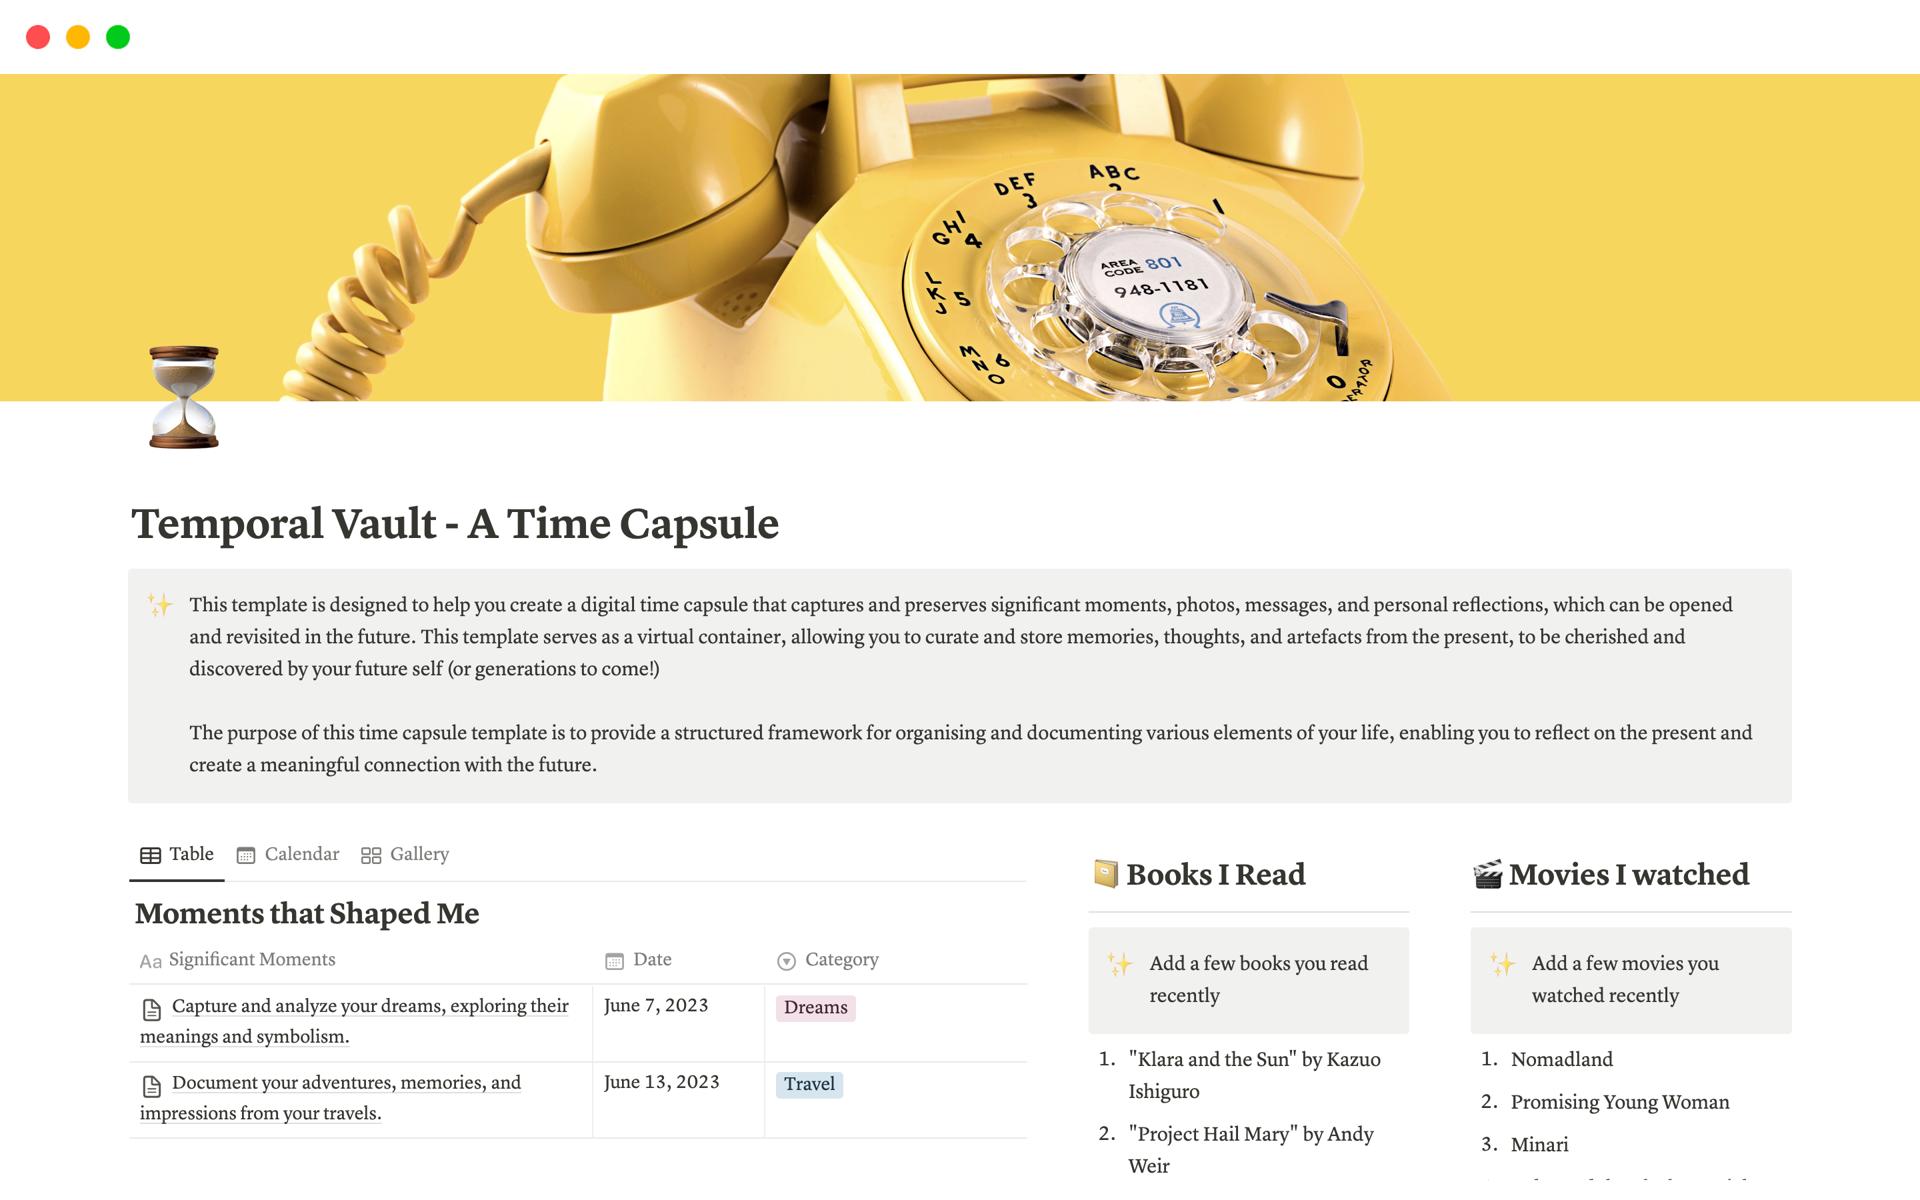 Temporal Vault Time Capsule is your ultimate tool for capturing and preserving precious moments, memories, and reflections. 